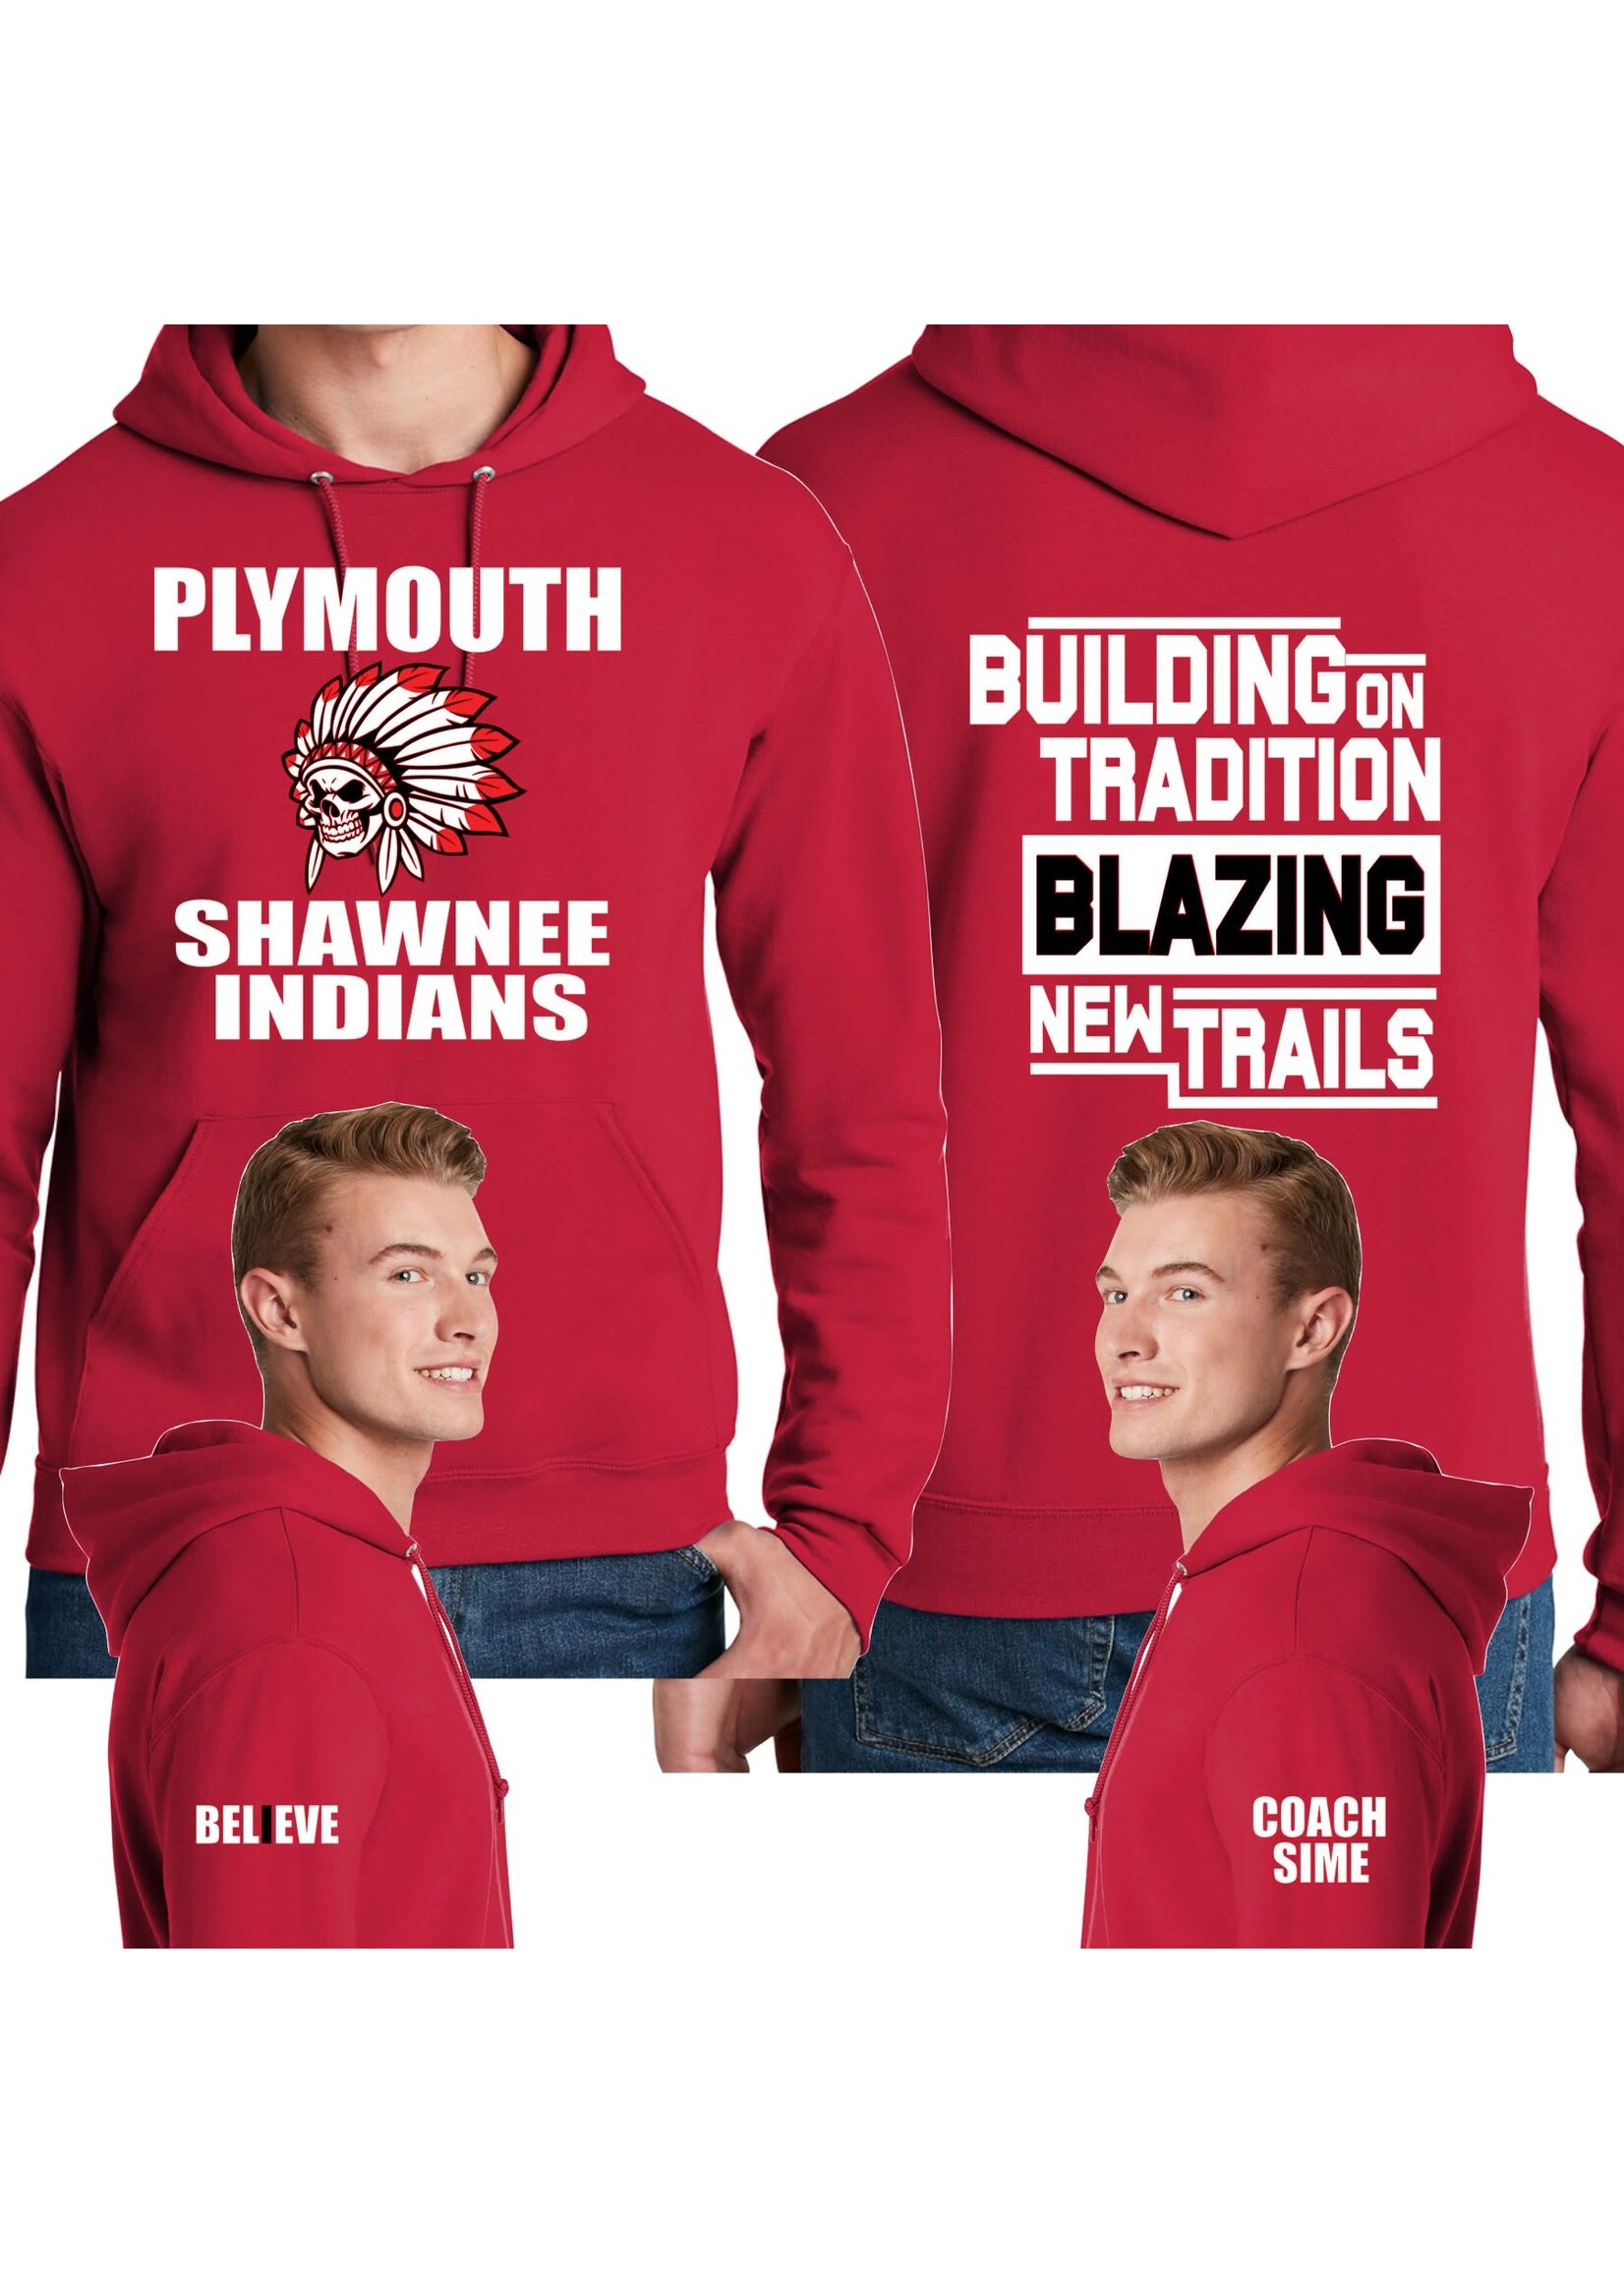 Plymouth Shawnee Indians Blazing New Trails Hoodie